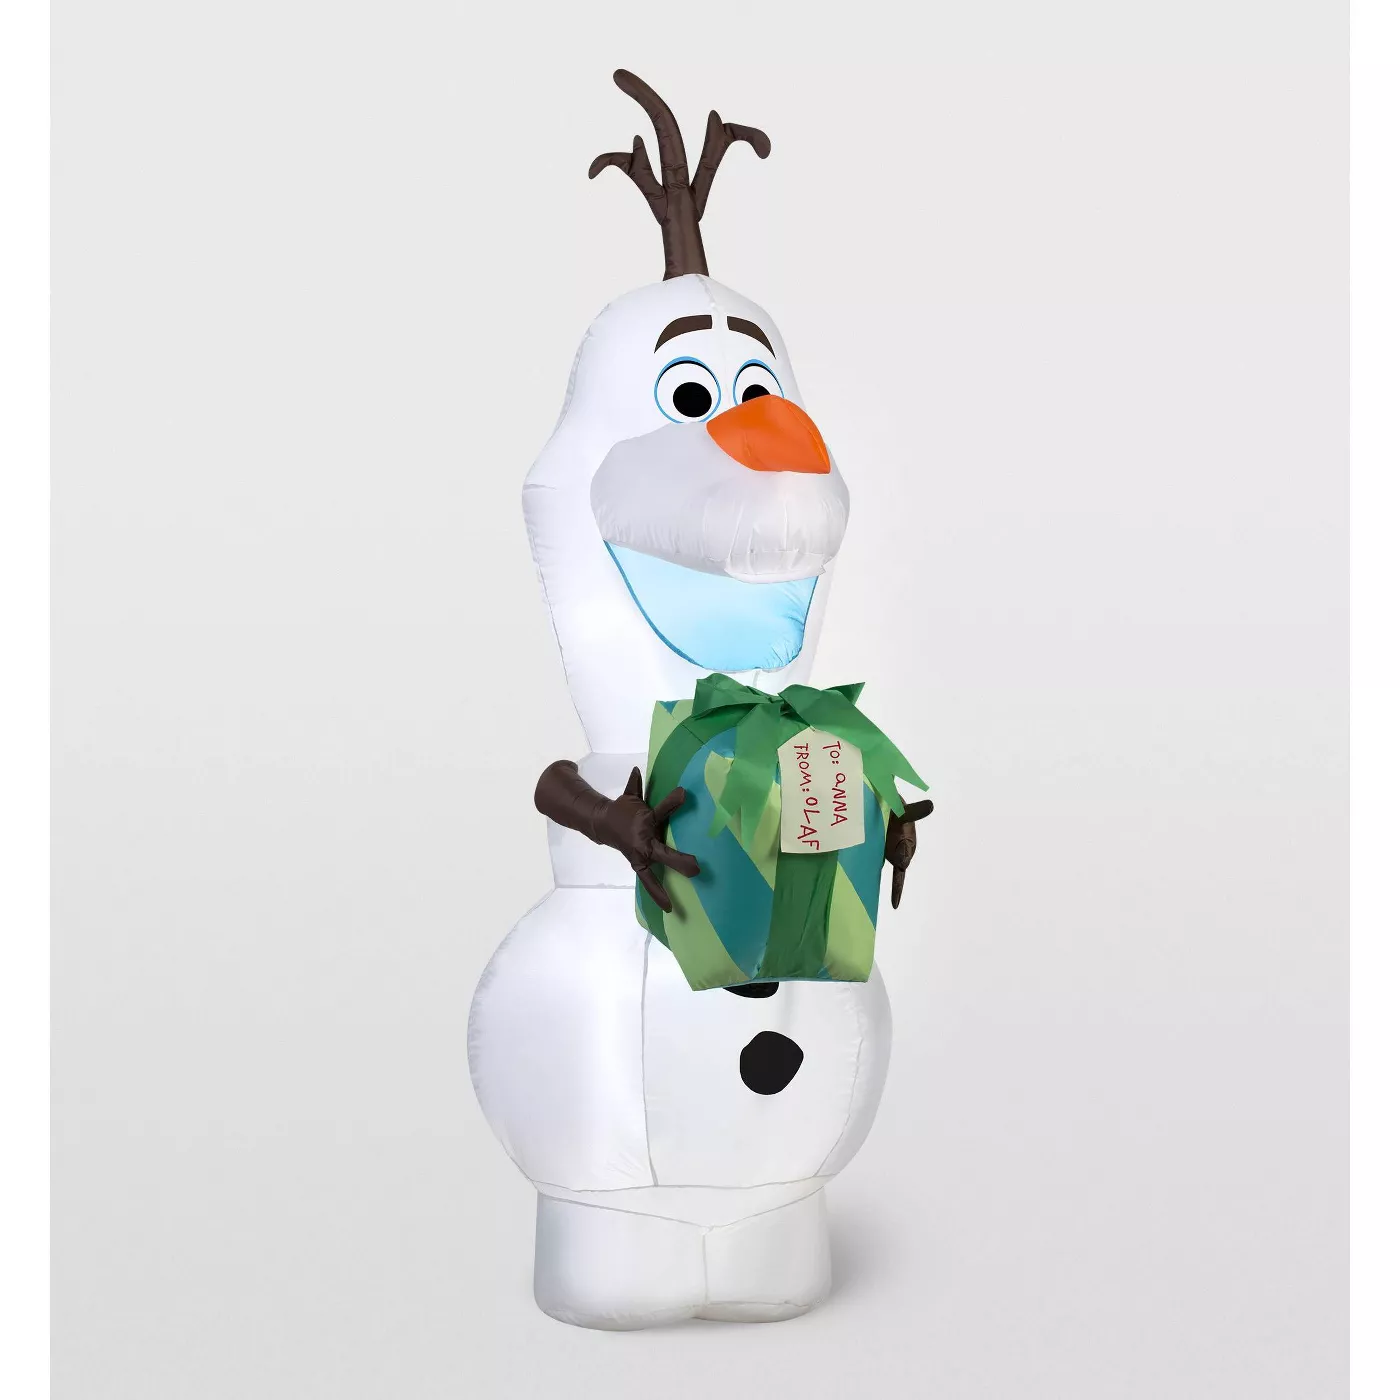 Disney Frozen Olaf with Gift Inflatable Holiday Decoration - image 1 of 2